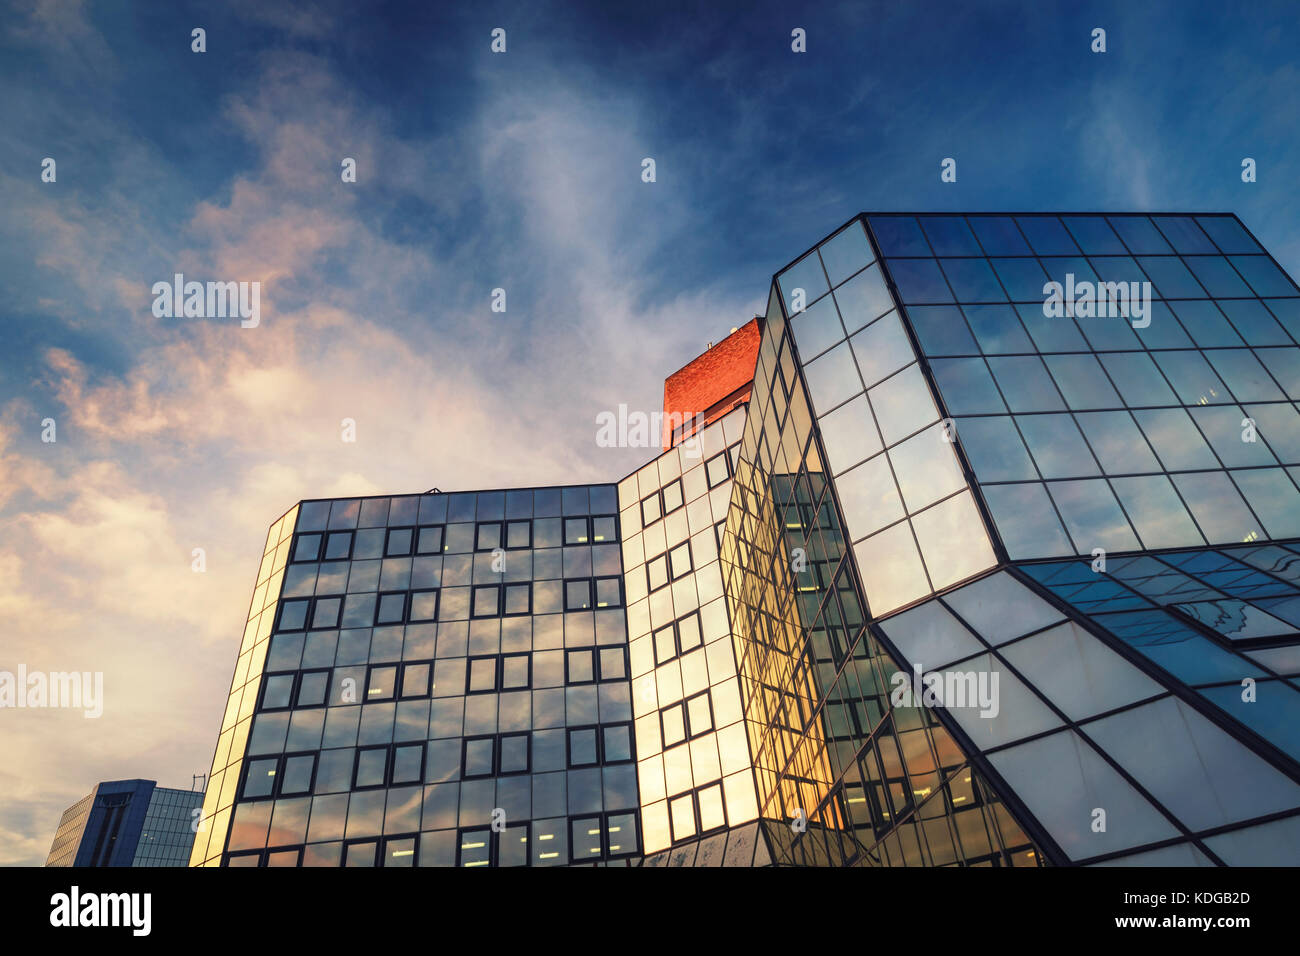 Sunset Clouds Reflections in Windows of Modern Office Building Stock Photo